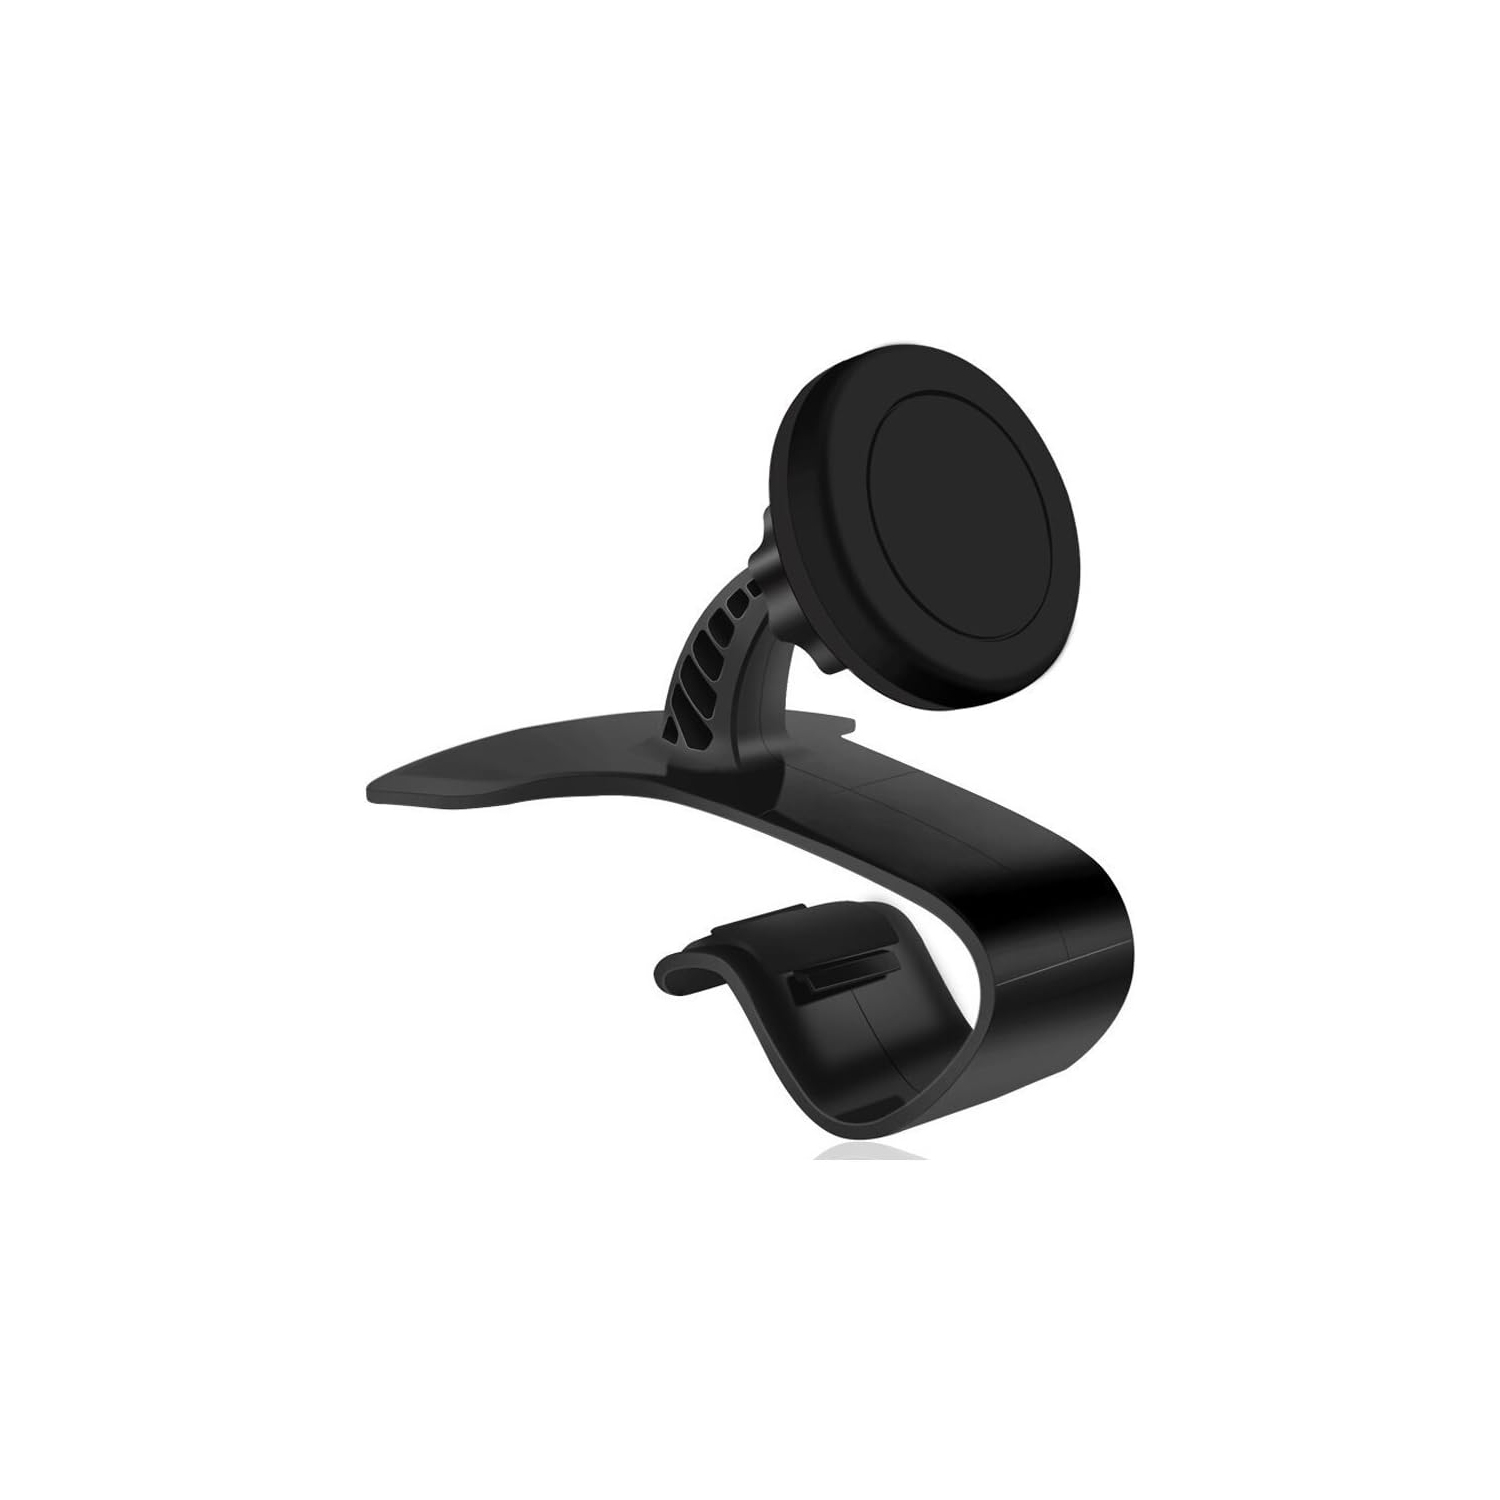 Navor Universal Car Phone Mount Holder for Vent Windshield Dashboard for Smartphones Including iPhone 7,7P, 6, 6S, Galaxy S7, S7 Edge-Black